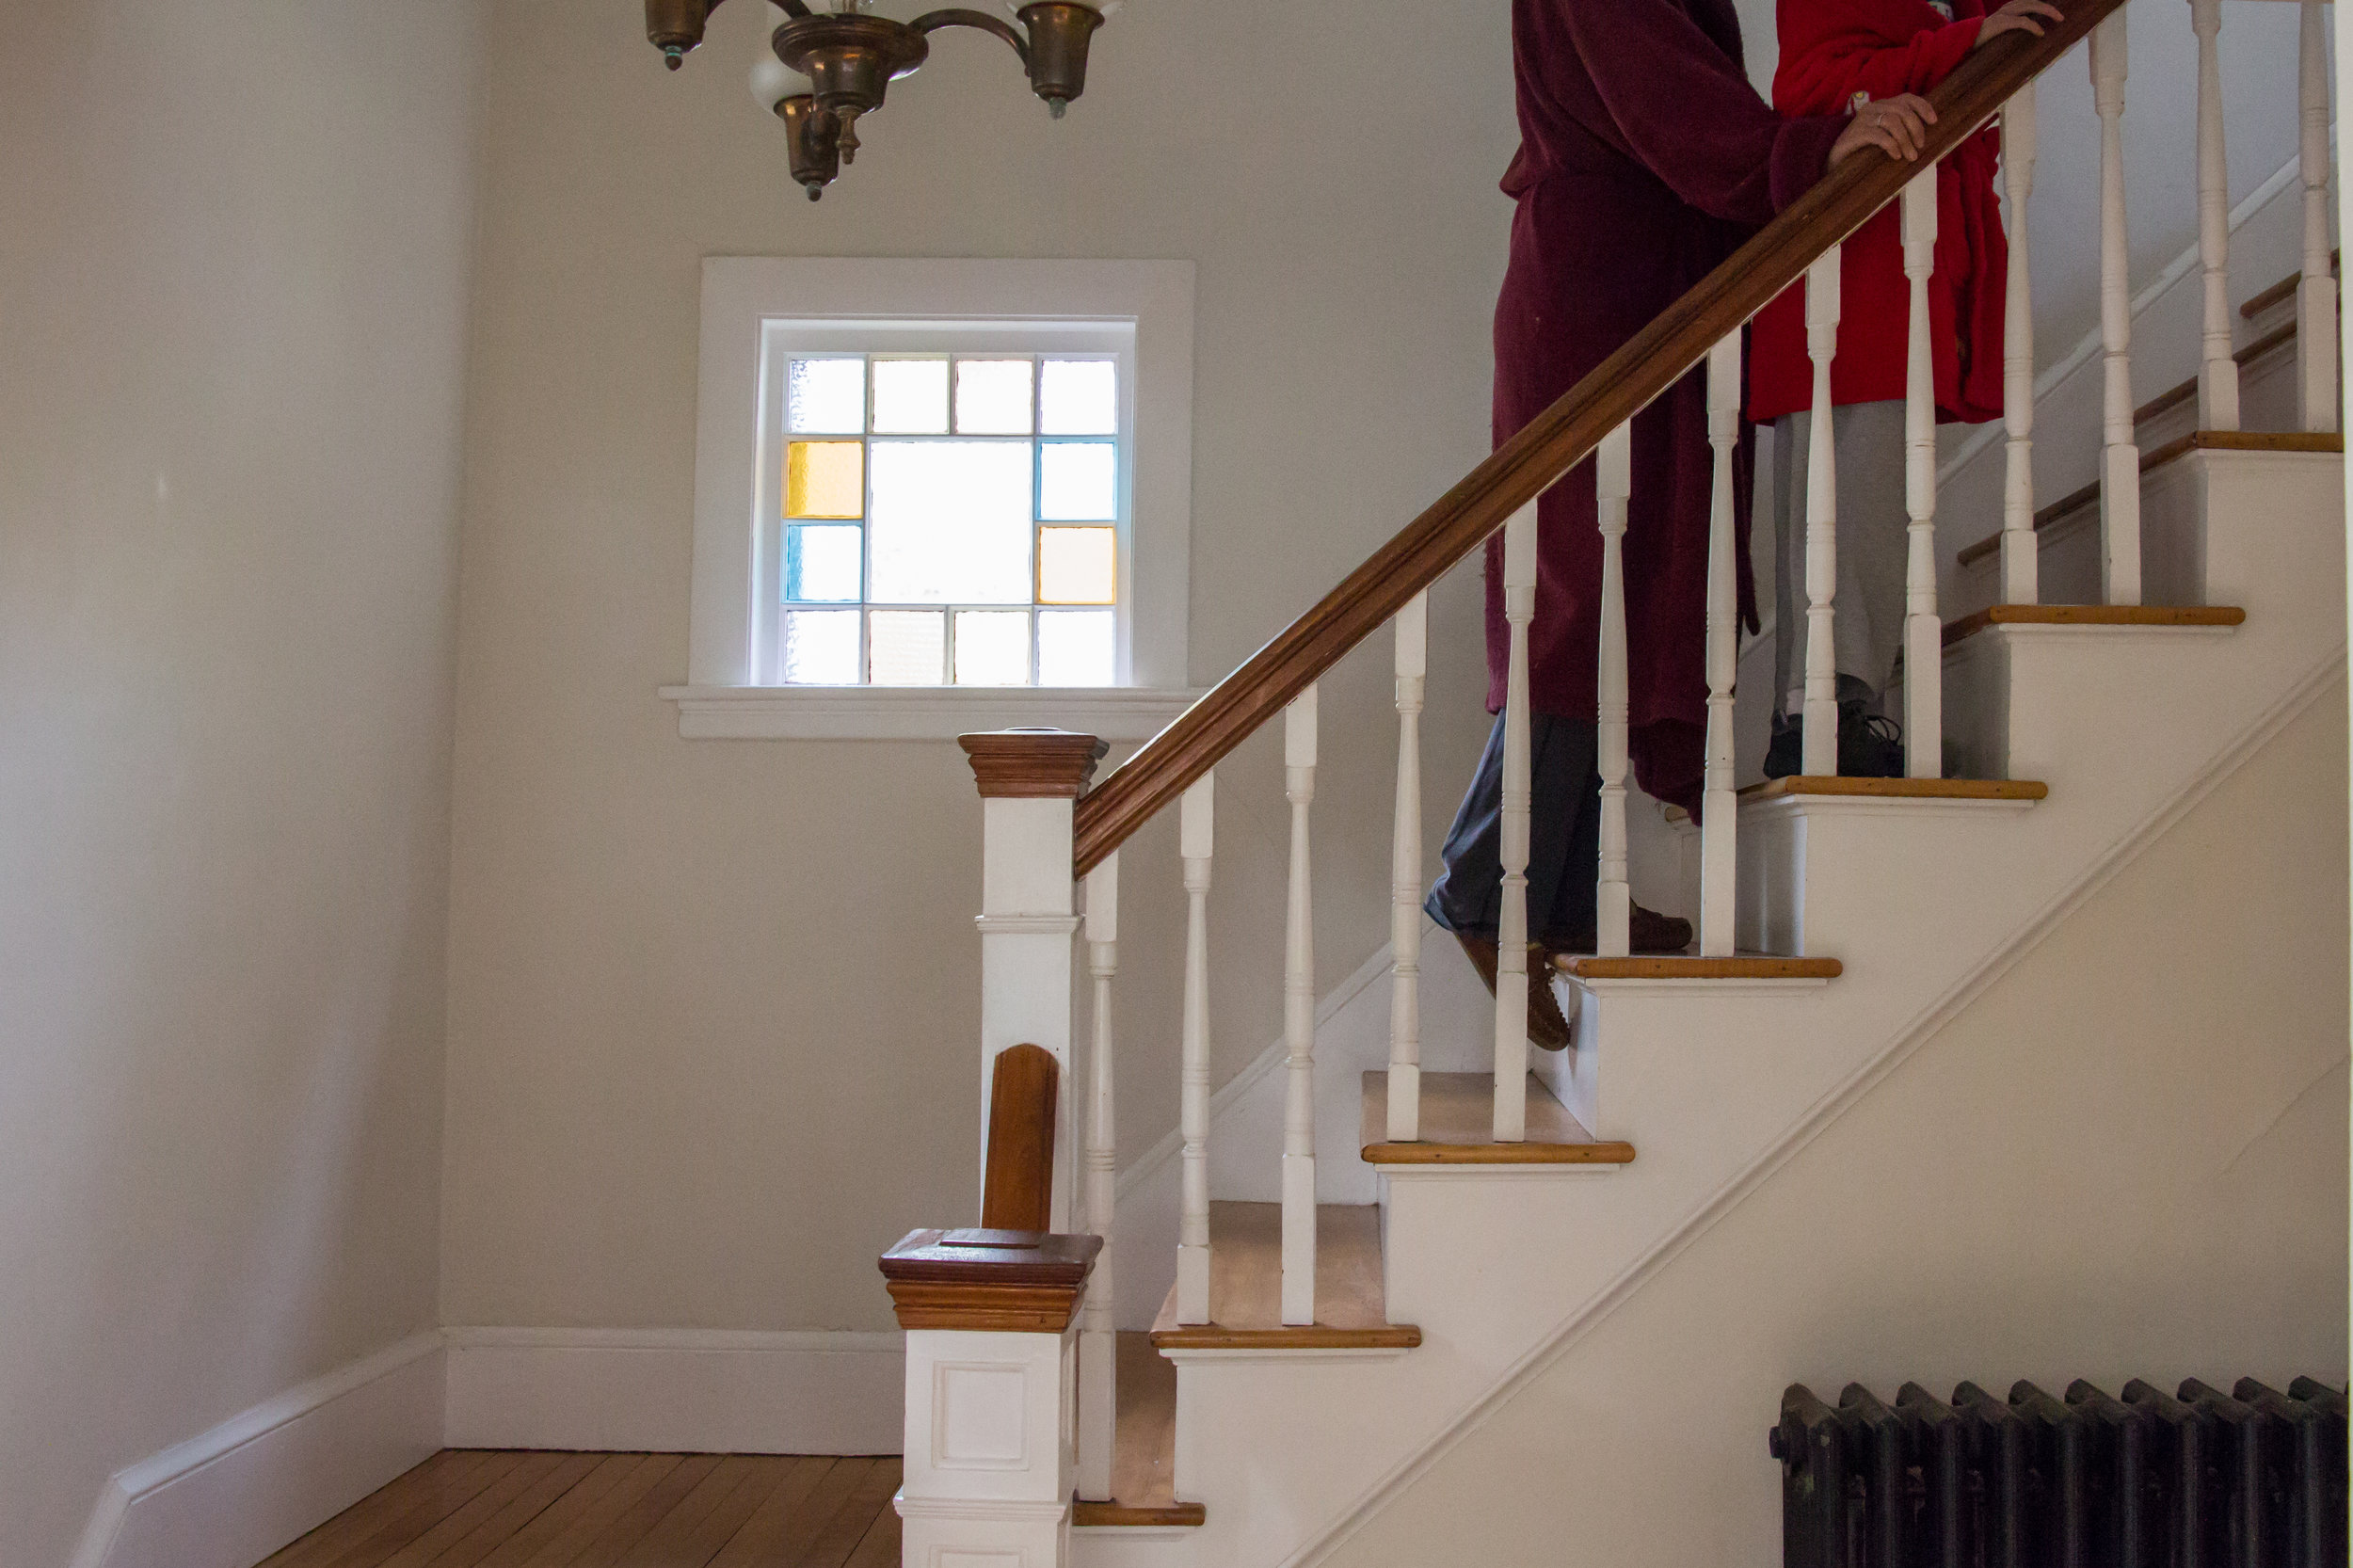  Christy Shake walks behind her son Calvin up the stairs in their home in Brunswick, Maine on September 30, 2017. Though Calvin can walk on his own now, his balance and vision are not good, and he can easily fall without Christy nearby to catch him. 